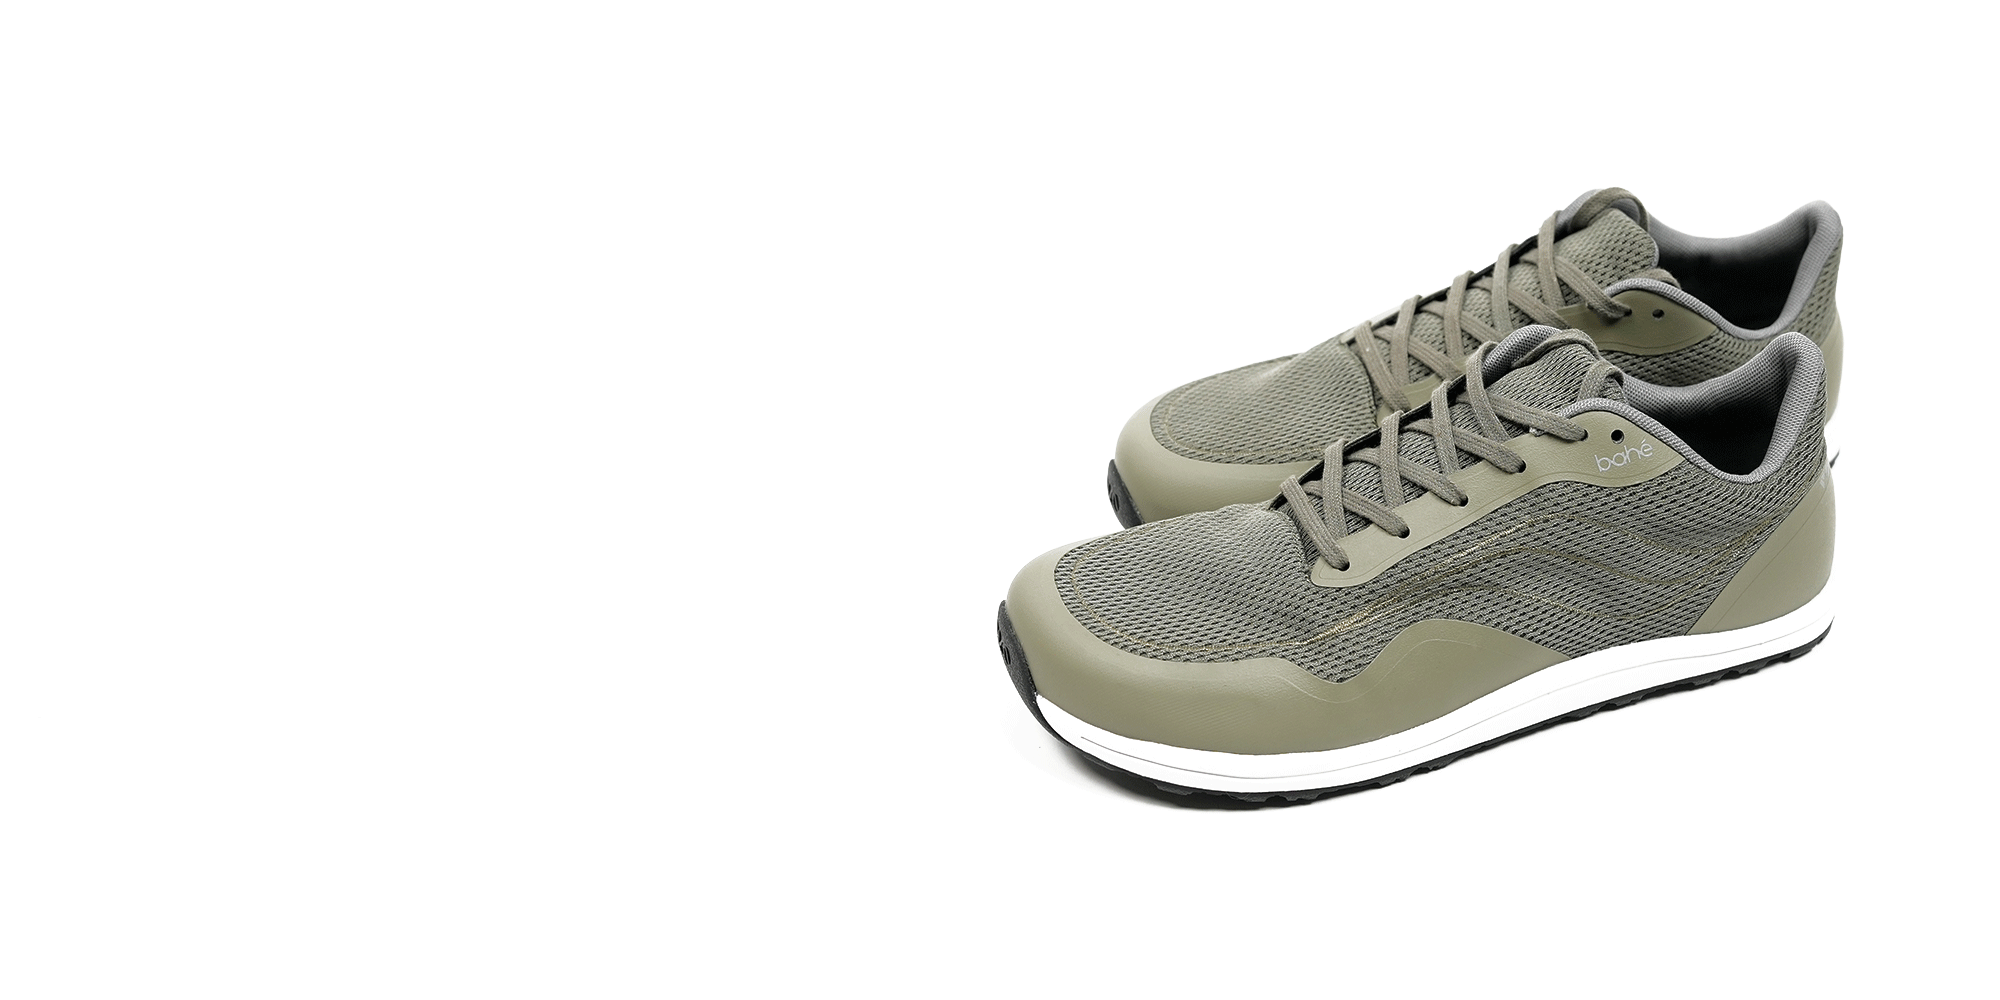 Bahé Ground Flow Running Shoe - A Connection to Nature and Comfort